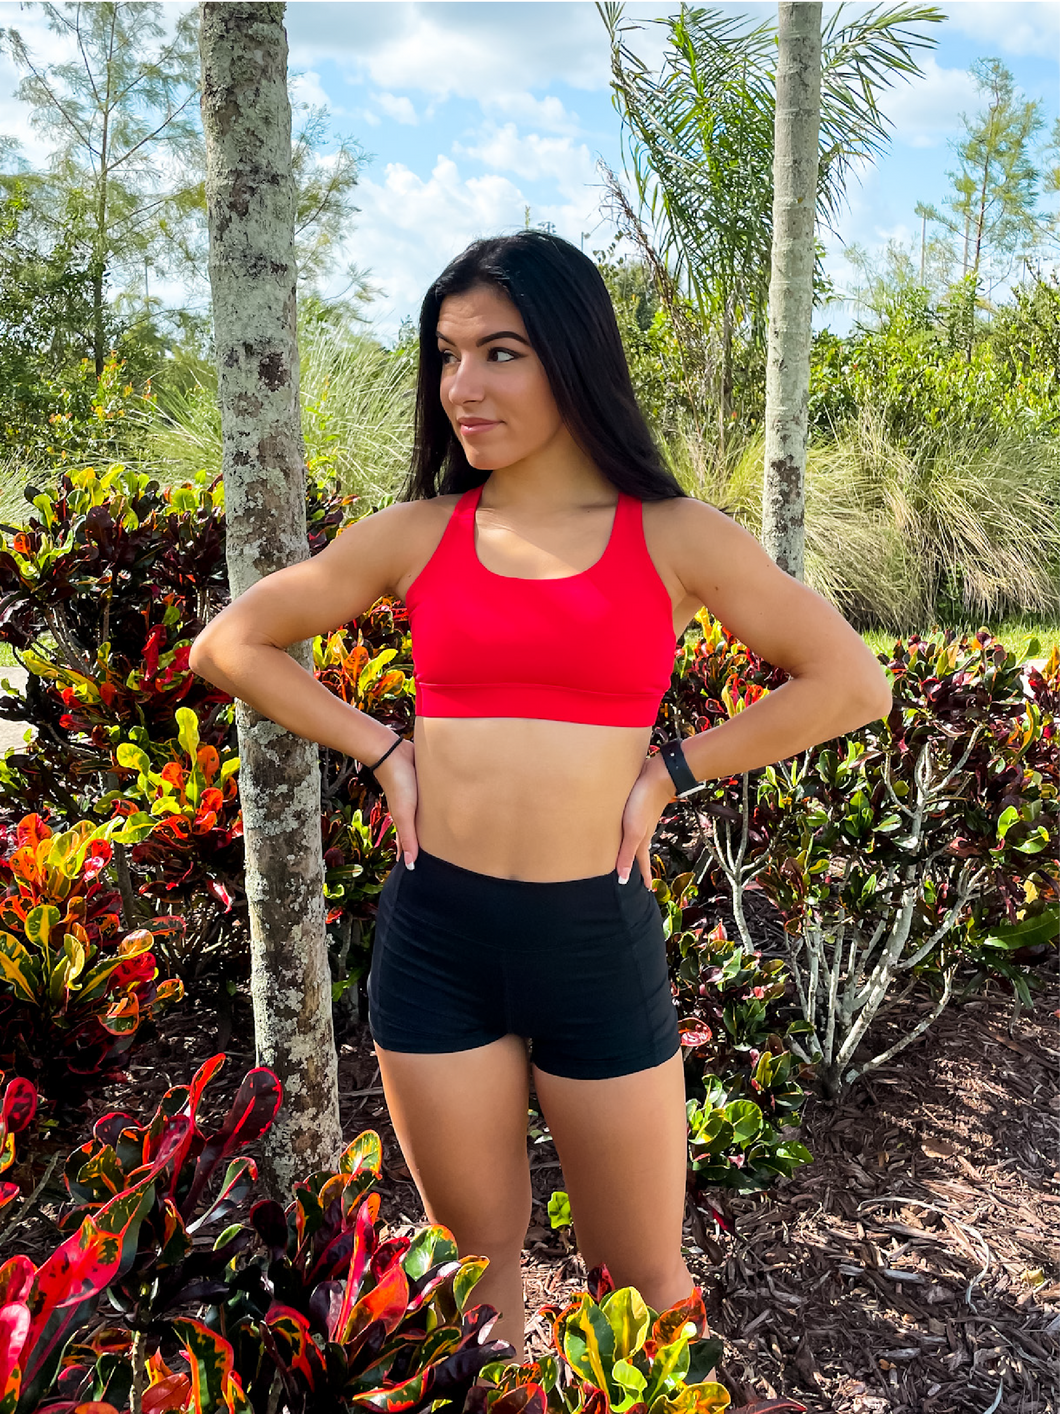 Young lady modeling Peachy Pia Worldwide Sports Bra. Sports bra is in color red with an 87% nylon, 13% spandex blend. Material is thick but flexible made to provide support and comfort.